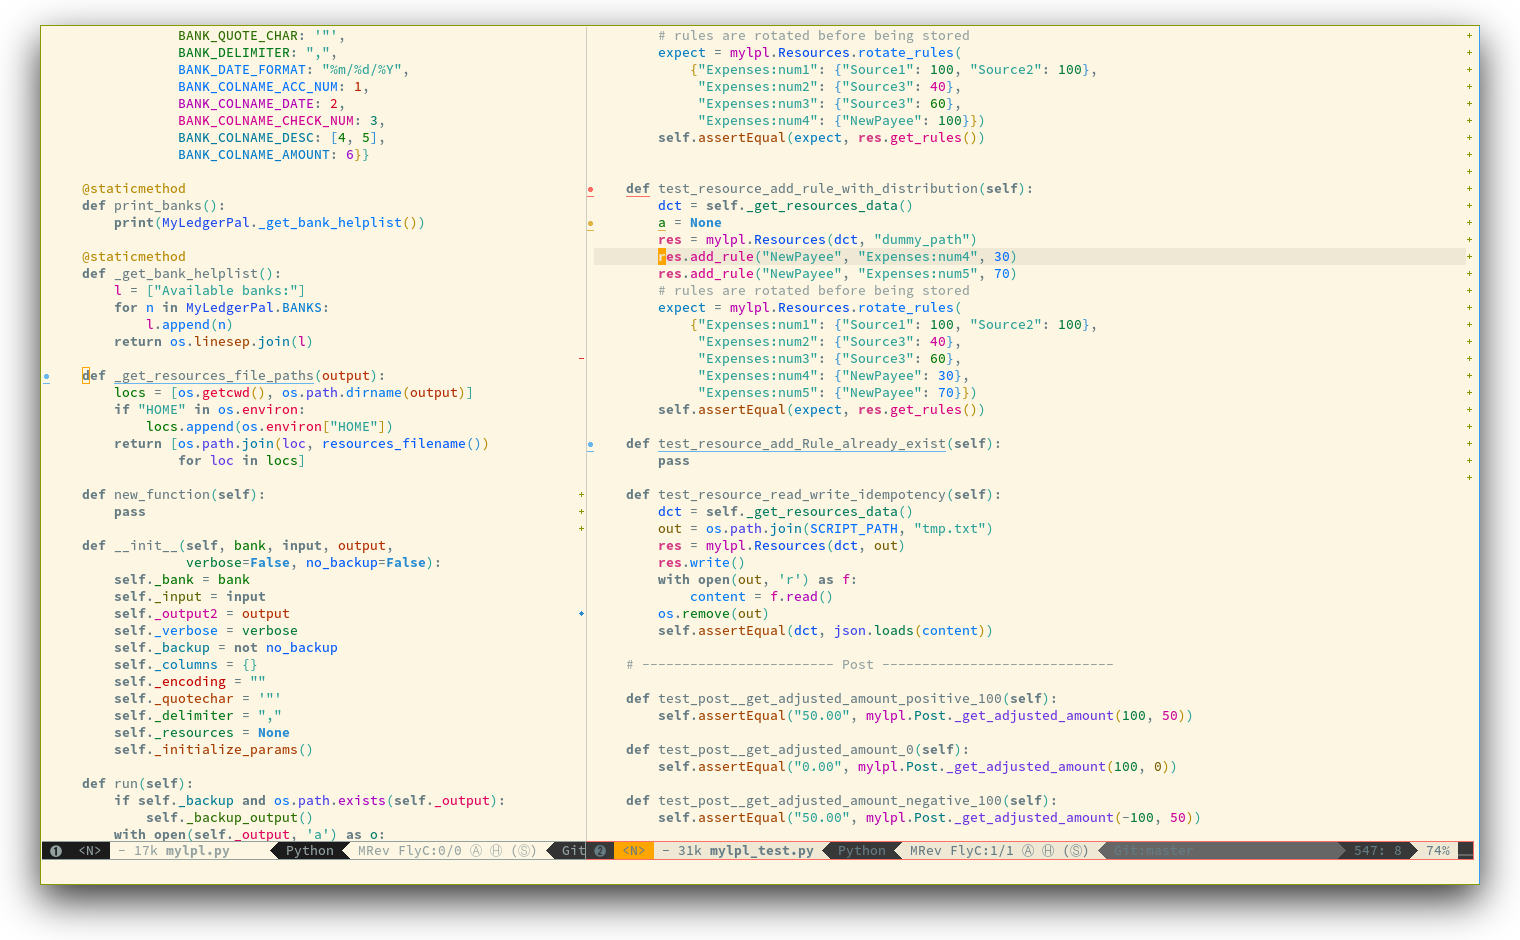 /TakeV/spacemacs/media/commit/16d8c24a30ce805f45669dfc22619eba201f77f1/layers/colors/img/theme-tweaks-python.png